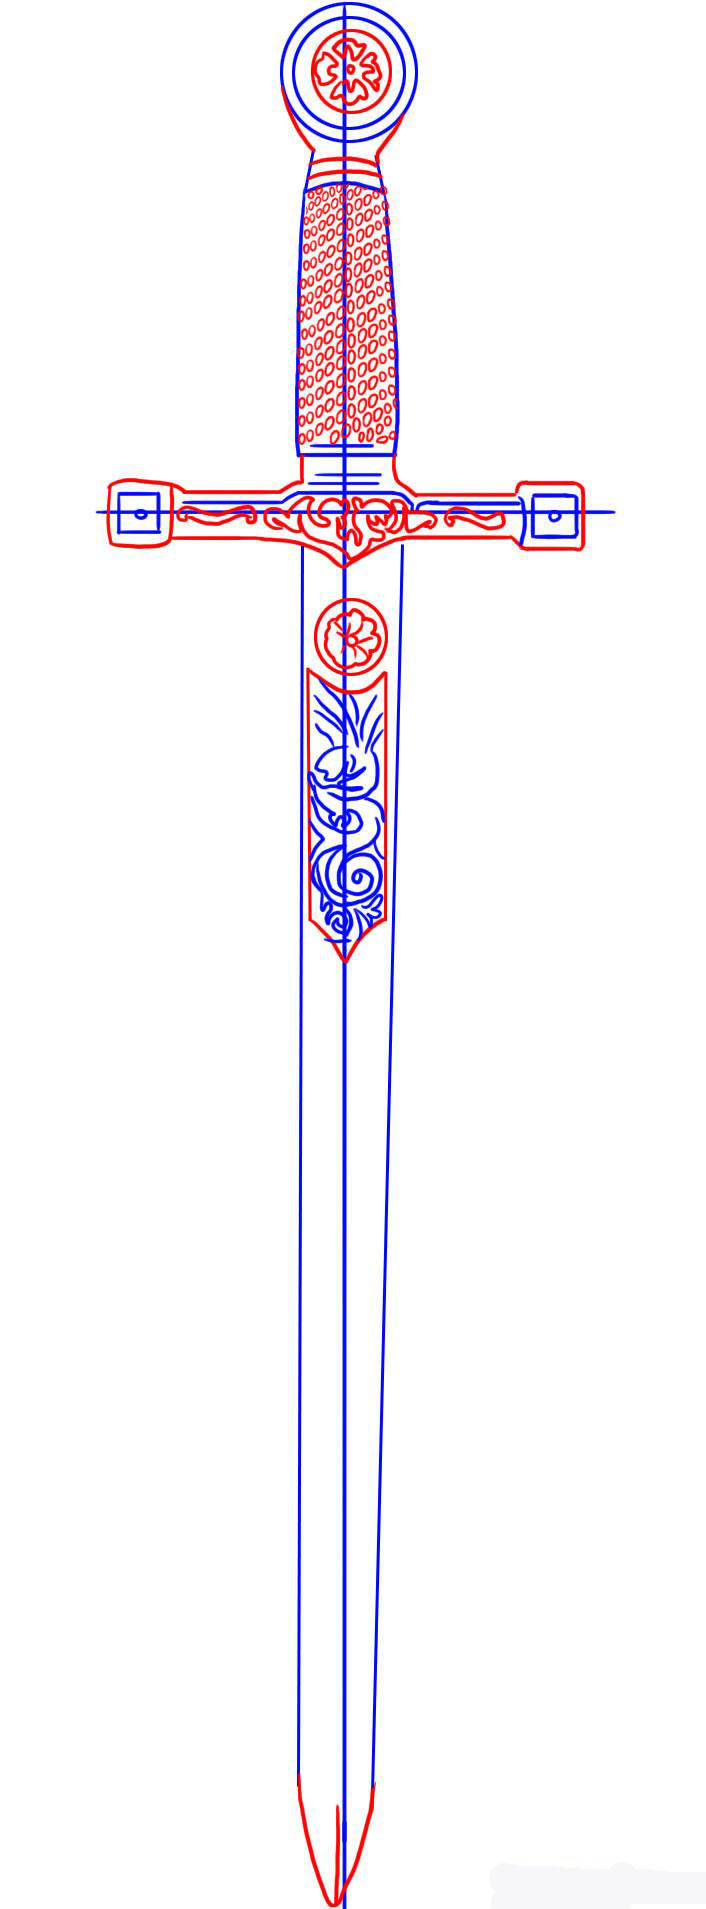 how-to-draw-excalibur-sword-in-the-stone-step-4_1_000000005598_5